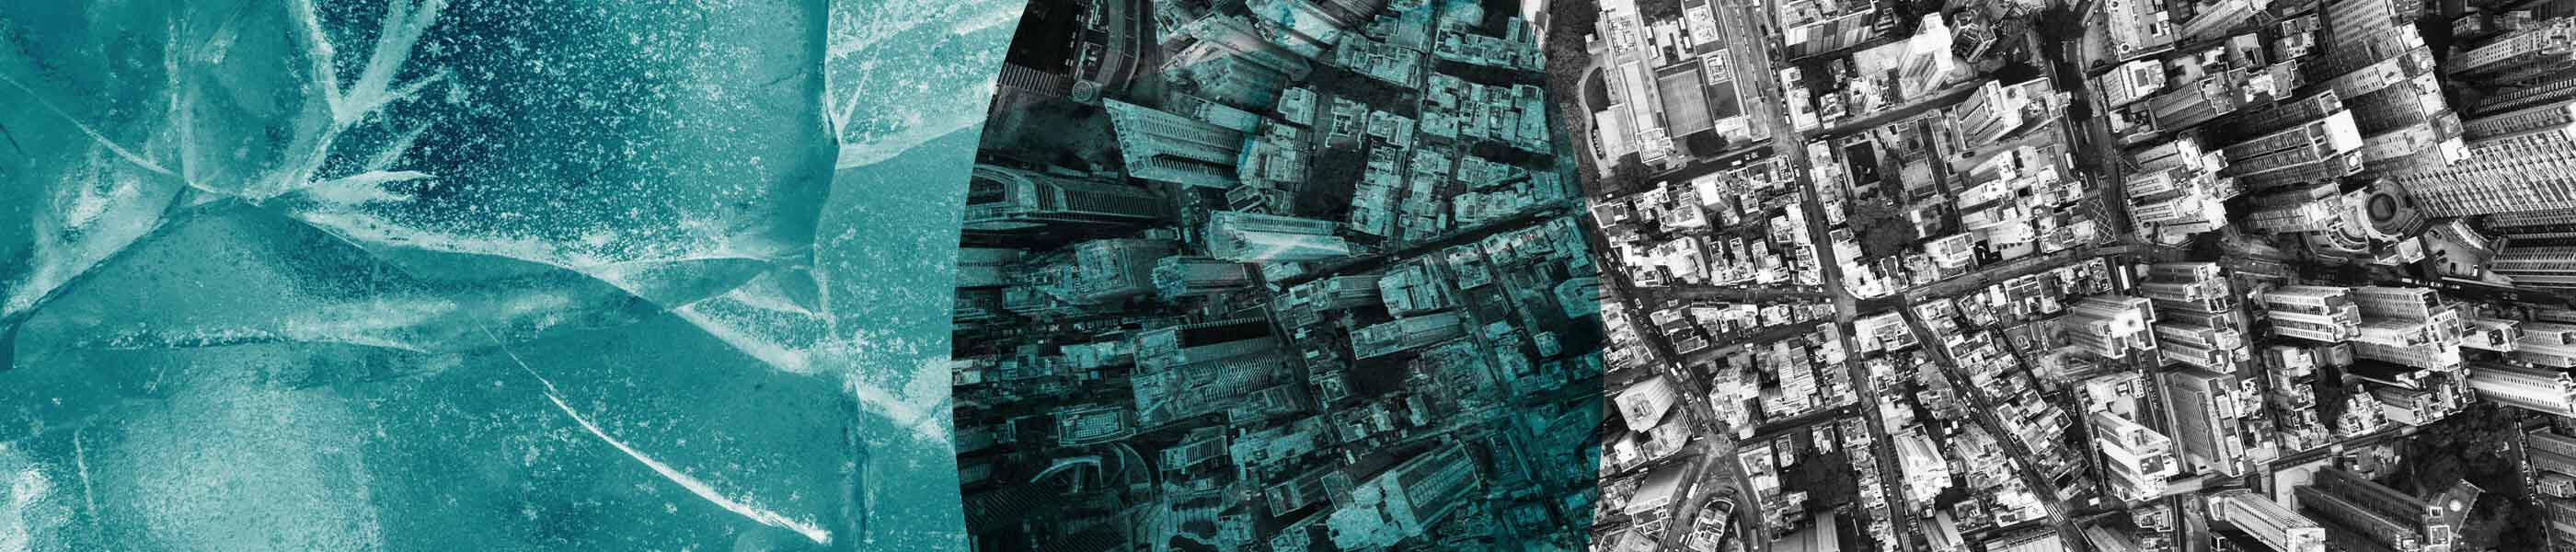 Overlapping photos of cracked ice and a towering city scape, seen from above